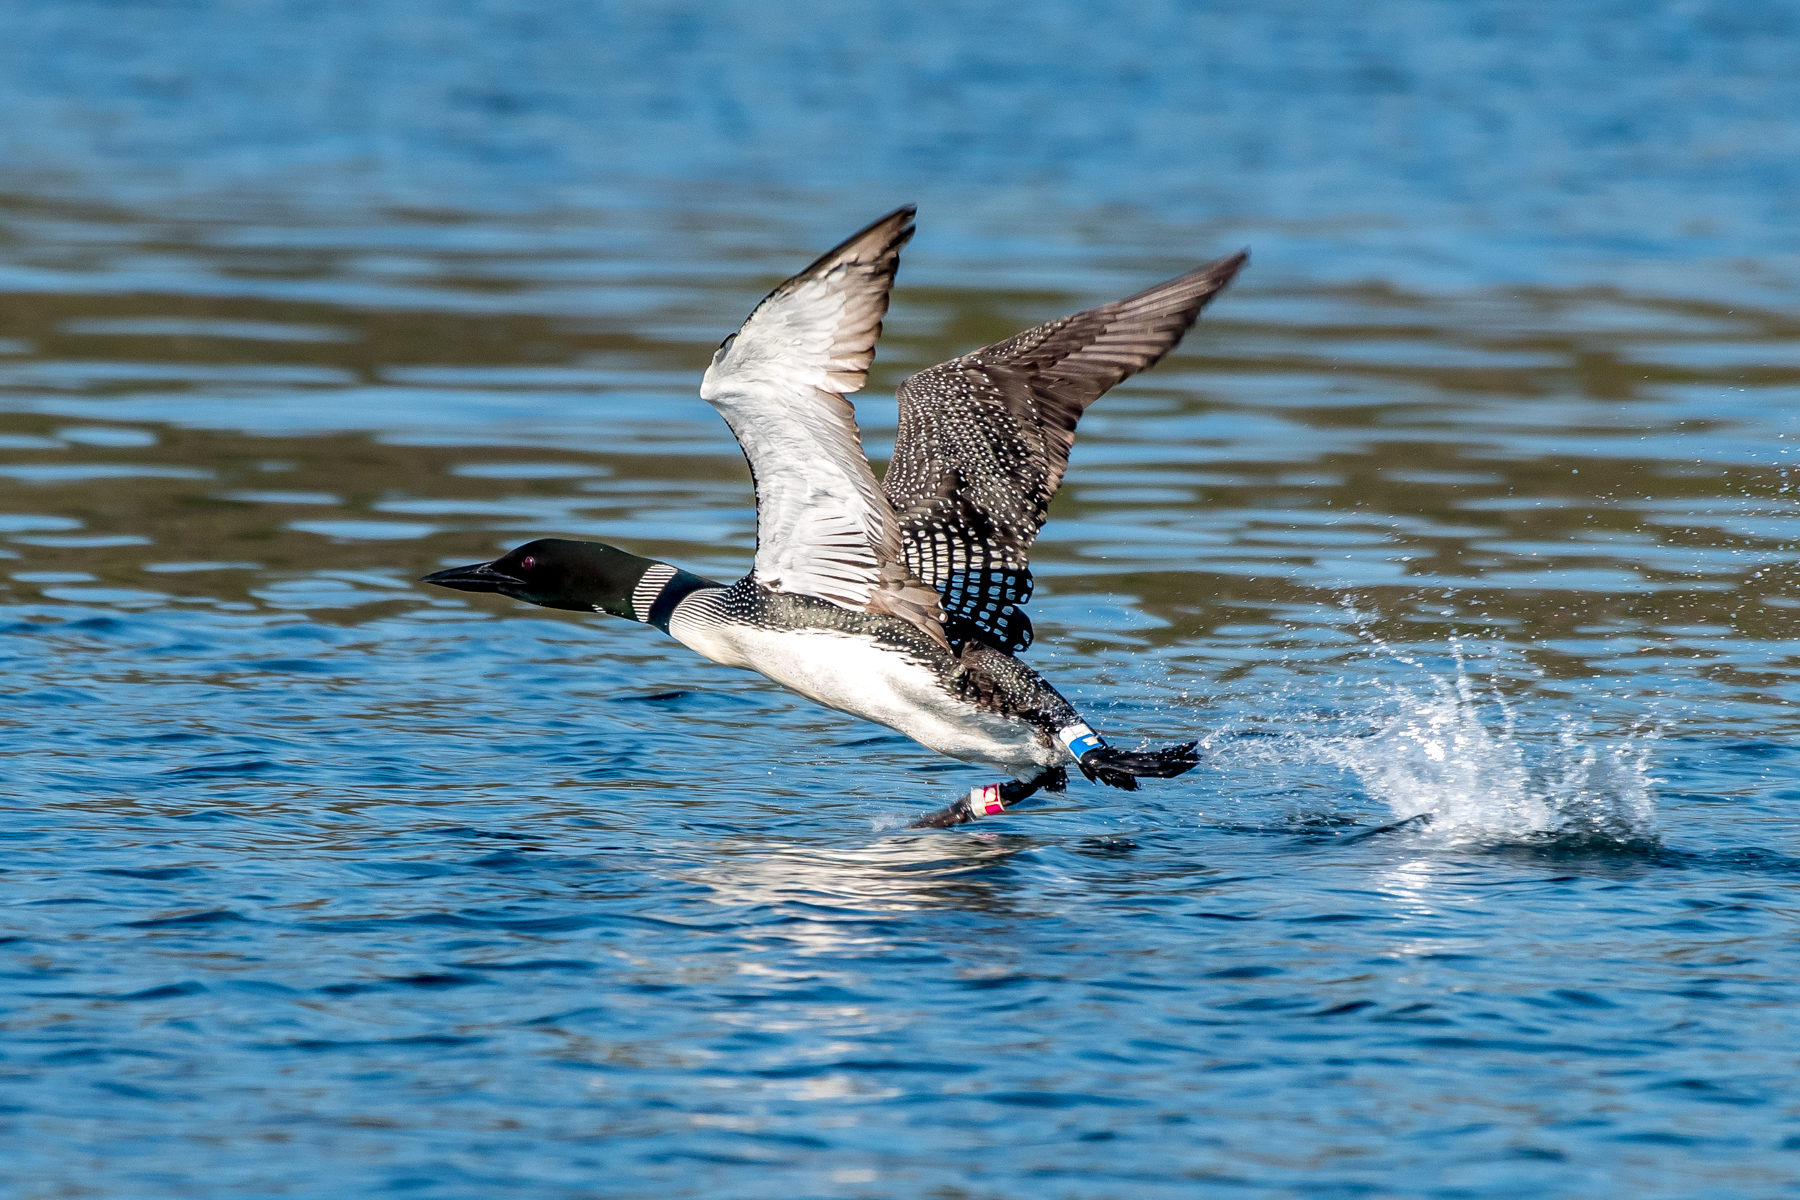   Common loons need a long way to take off from the surface of the water. &nbsp;Here is a loon getting up speed to take off. &nbsp;You can see the research bands on this legs of this bird.... &nbsp;7/6/16  